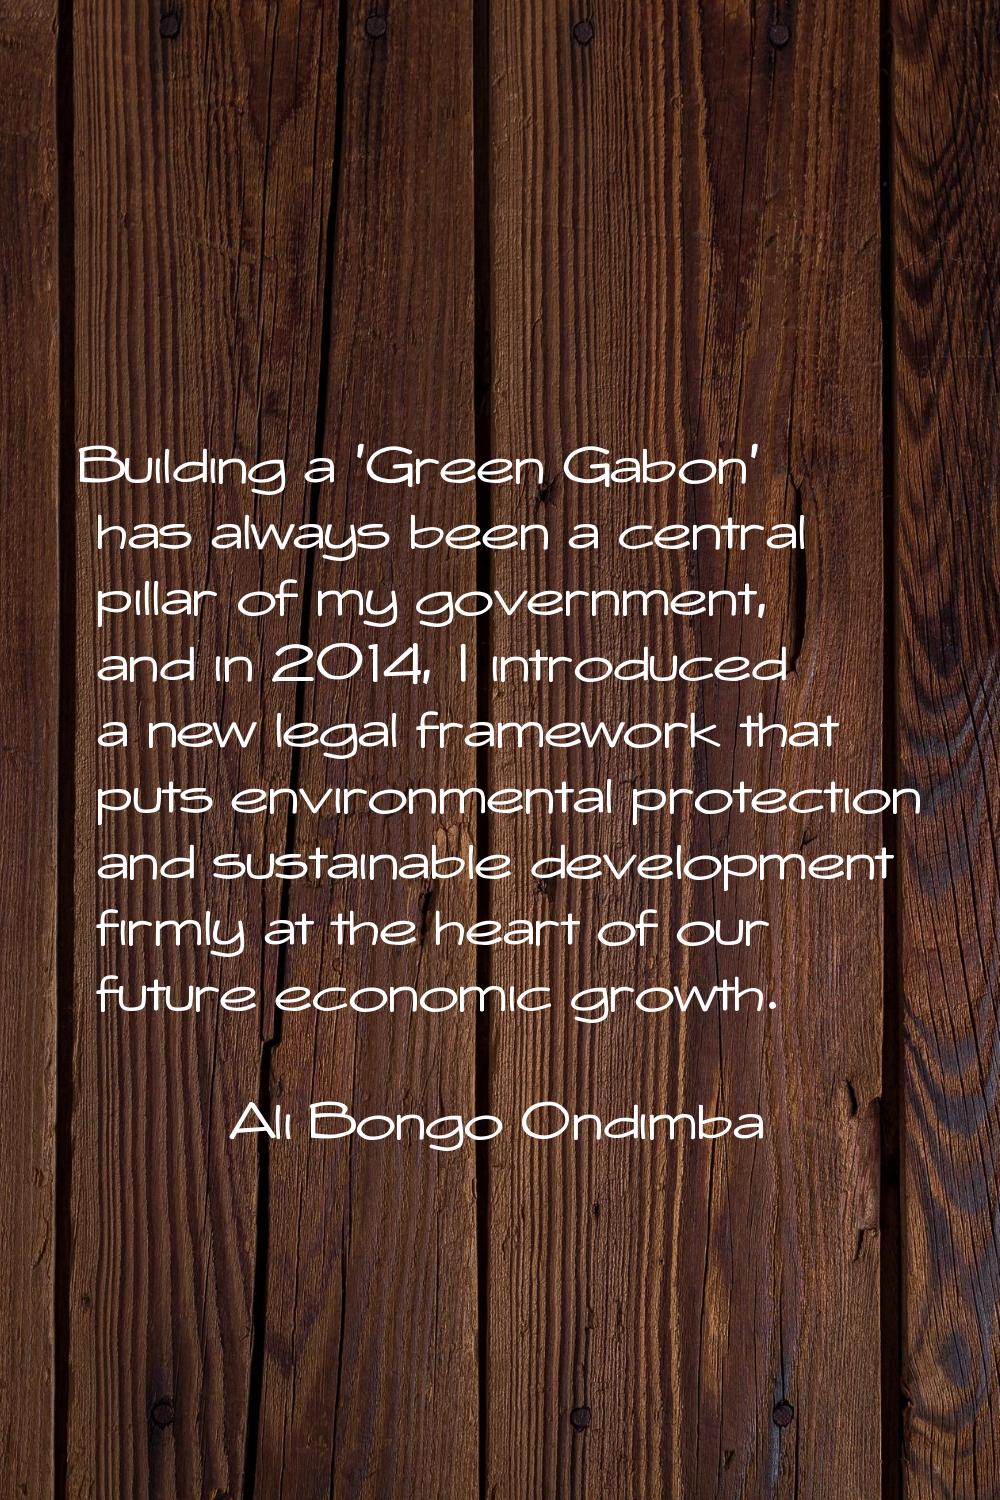 Building a 'Green Gabon' has always been a central pillar of my government, and in 2014, I introduc